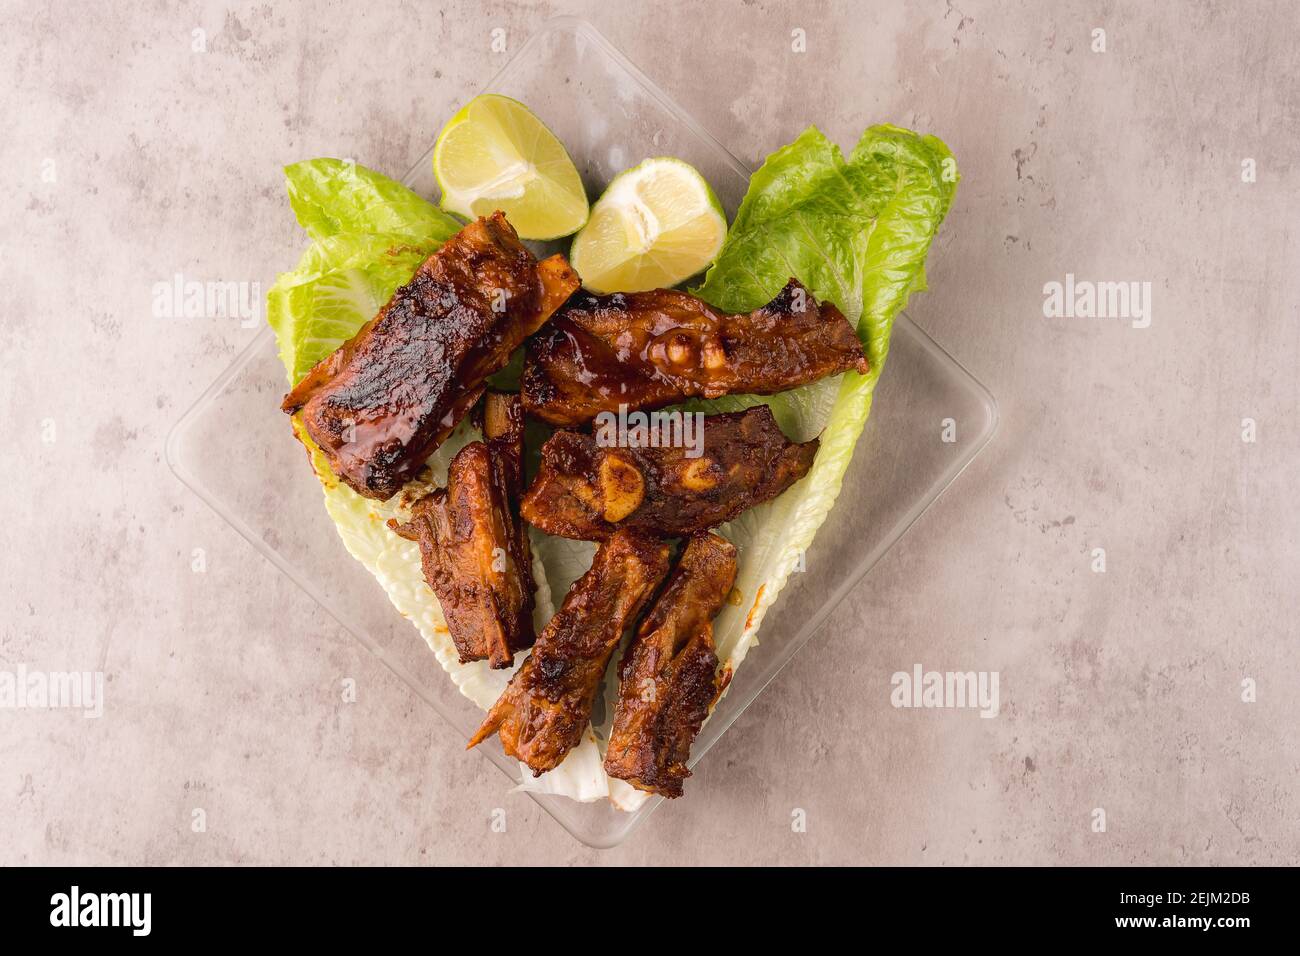 Plate of hot pork ribs prepared on the grill with BBQ sauce on a bed of fresh lettuce Stock Photo